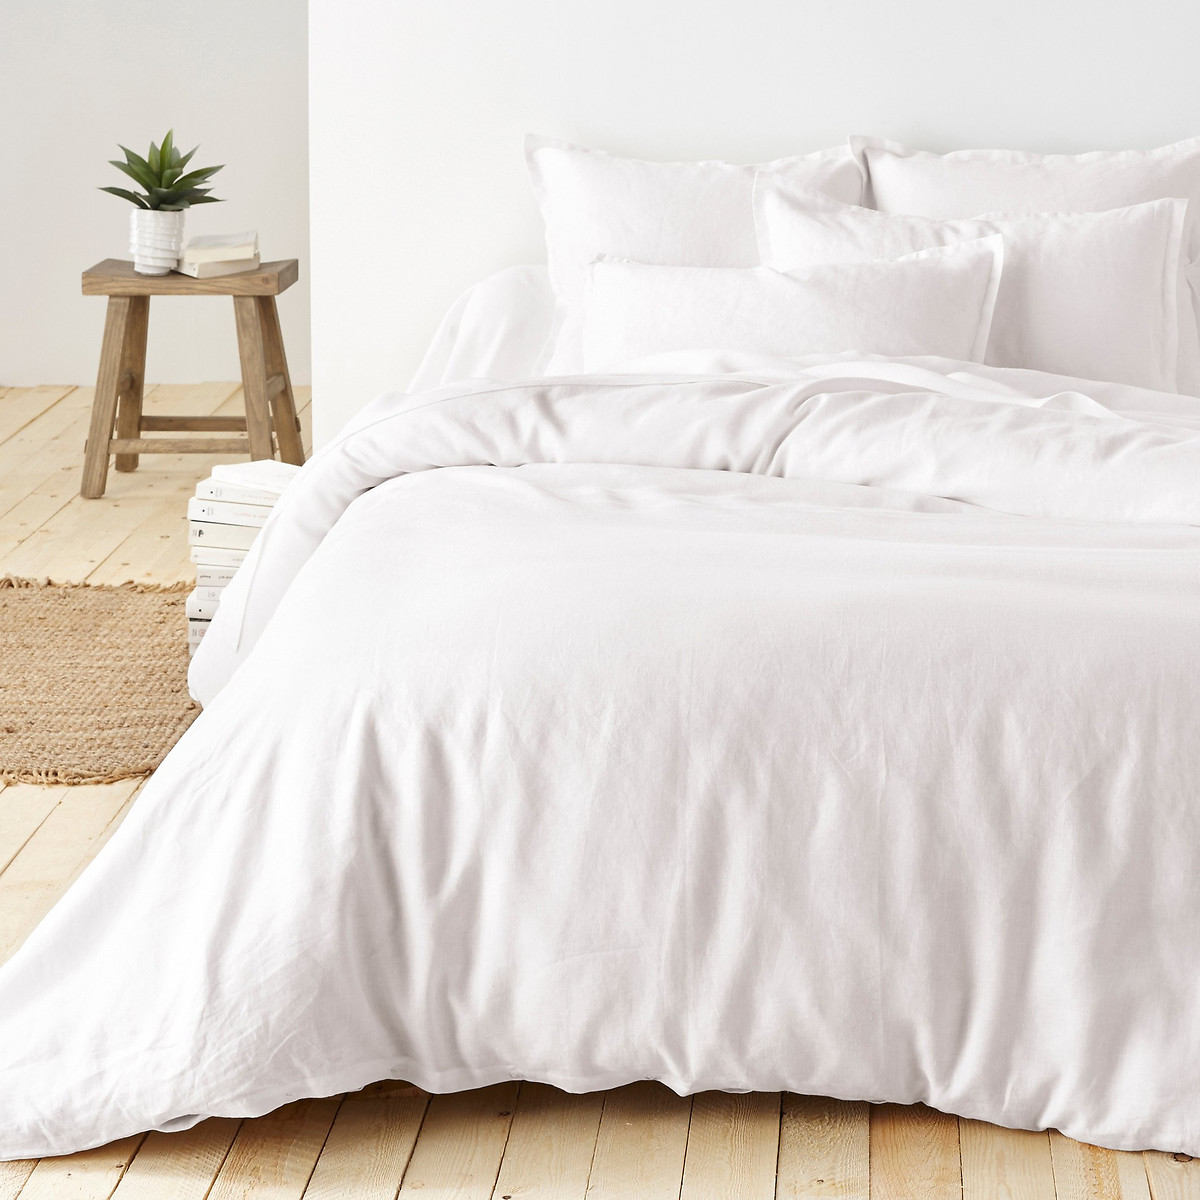 Washed Linen Duvet Cover La Redoute, What Size Should My Duvet Cover Be